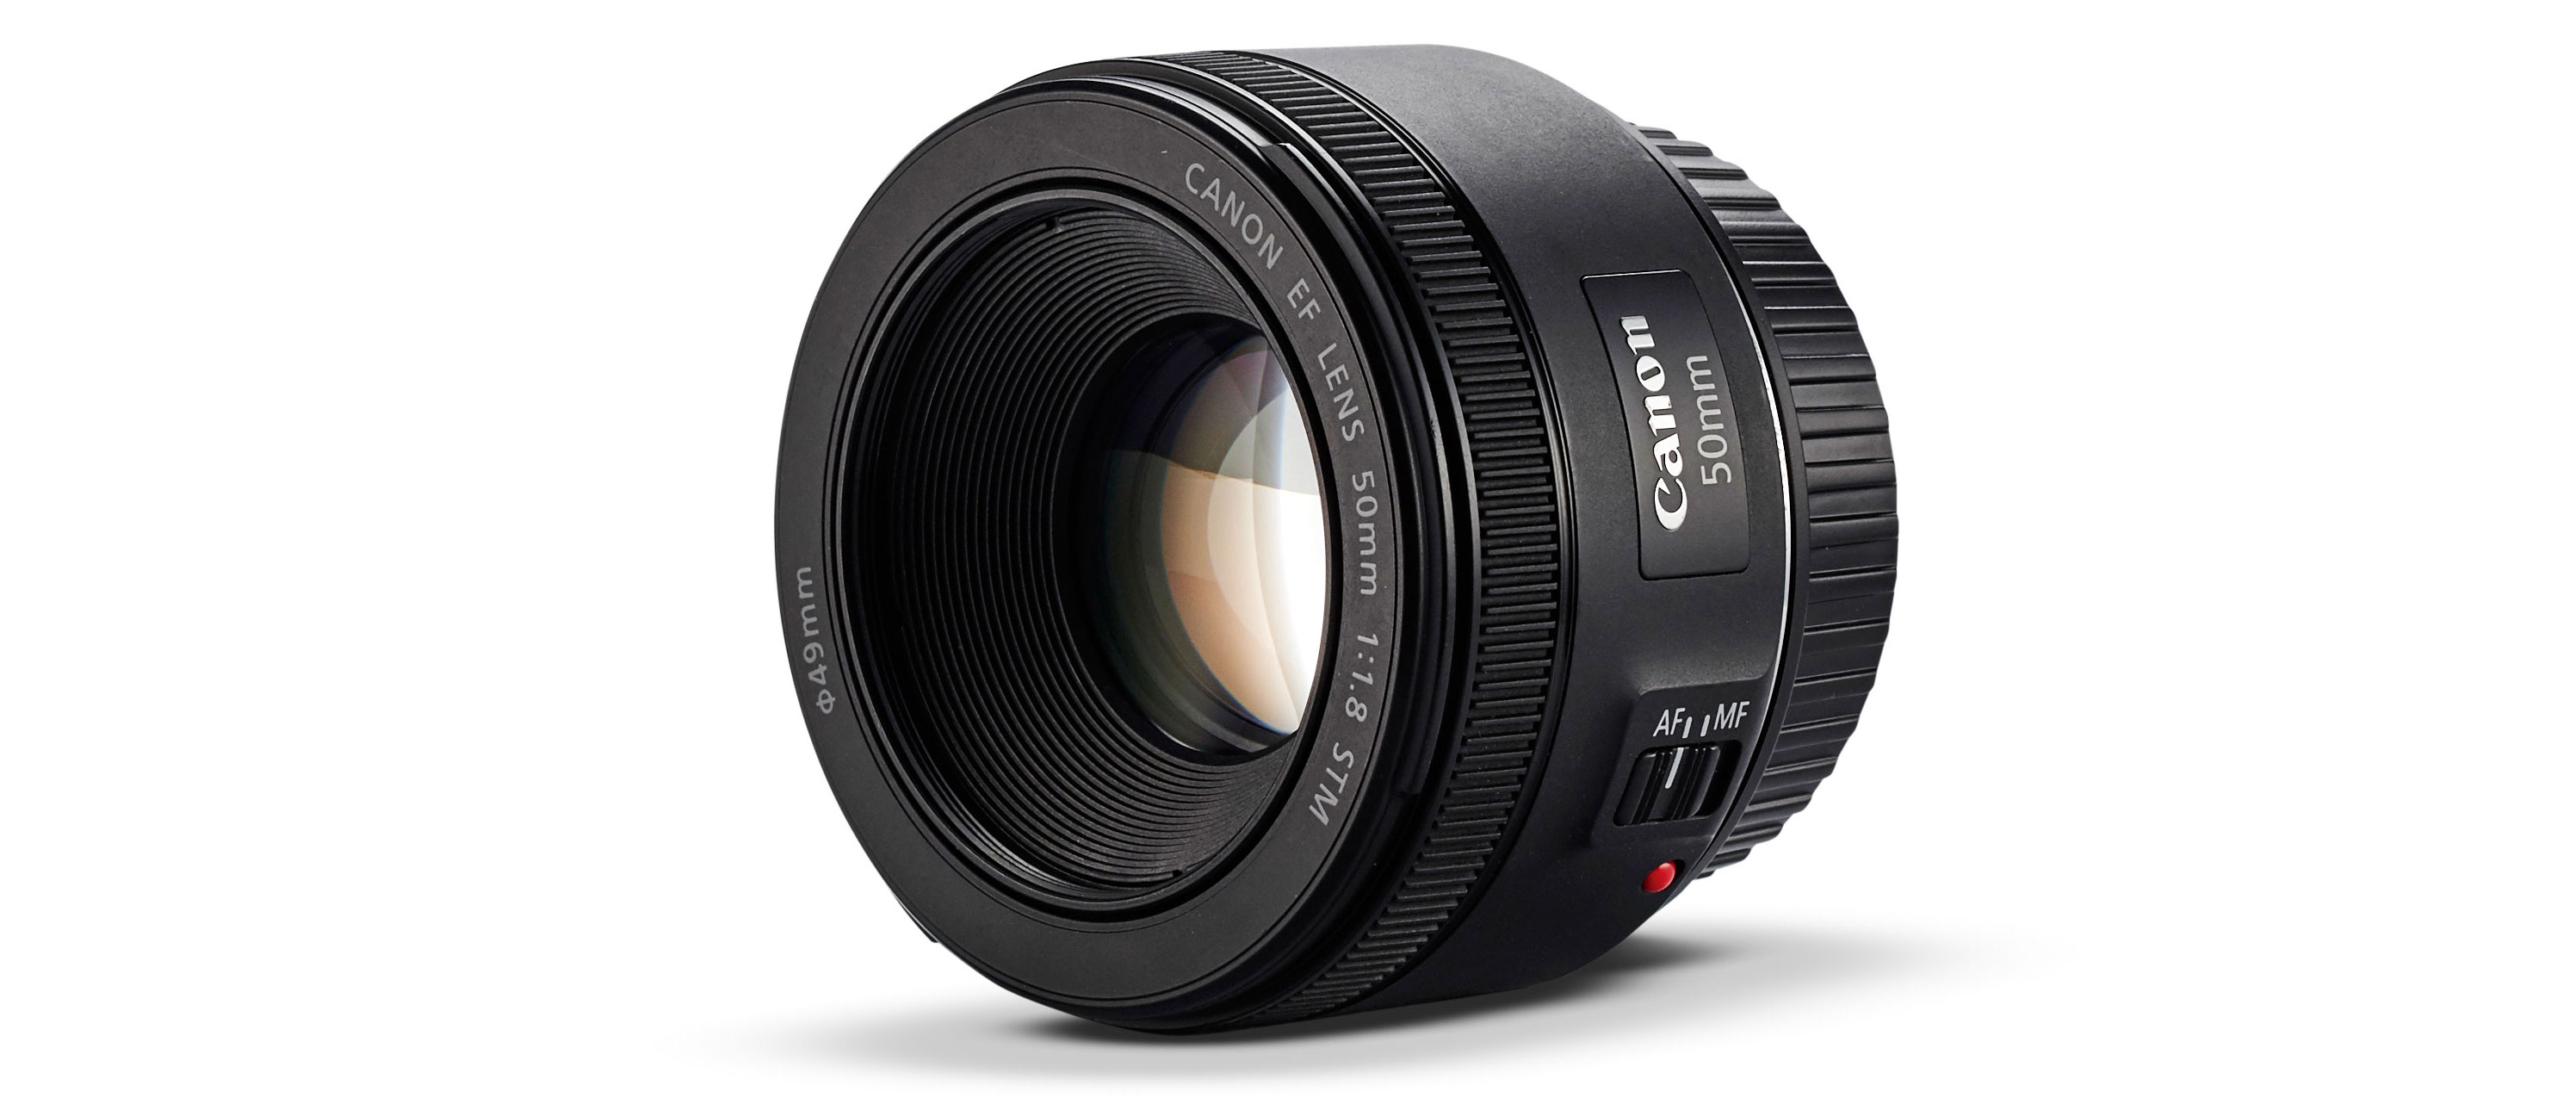 Canon 50 мм. Canon 50mm f/1.8. Canon 50mm 1.8 STM. Canon EF 50mm f/1.8 STM. Canon EF 50mm f/1.8.